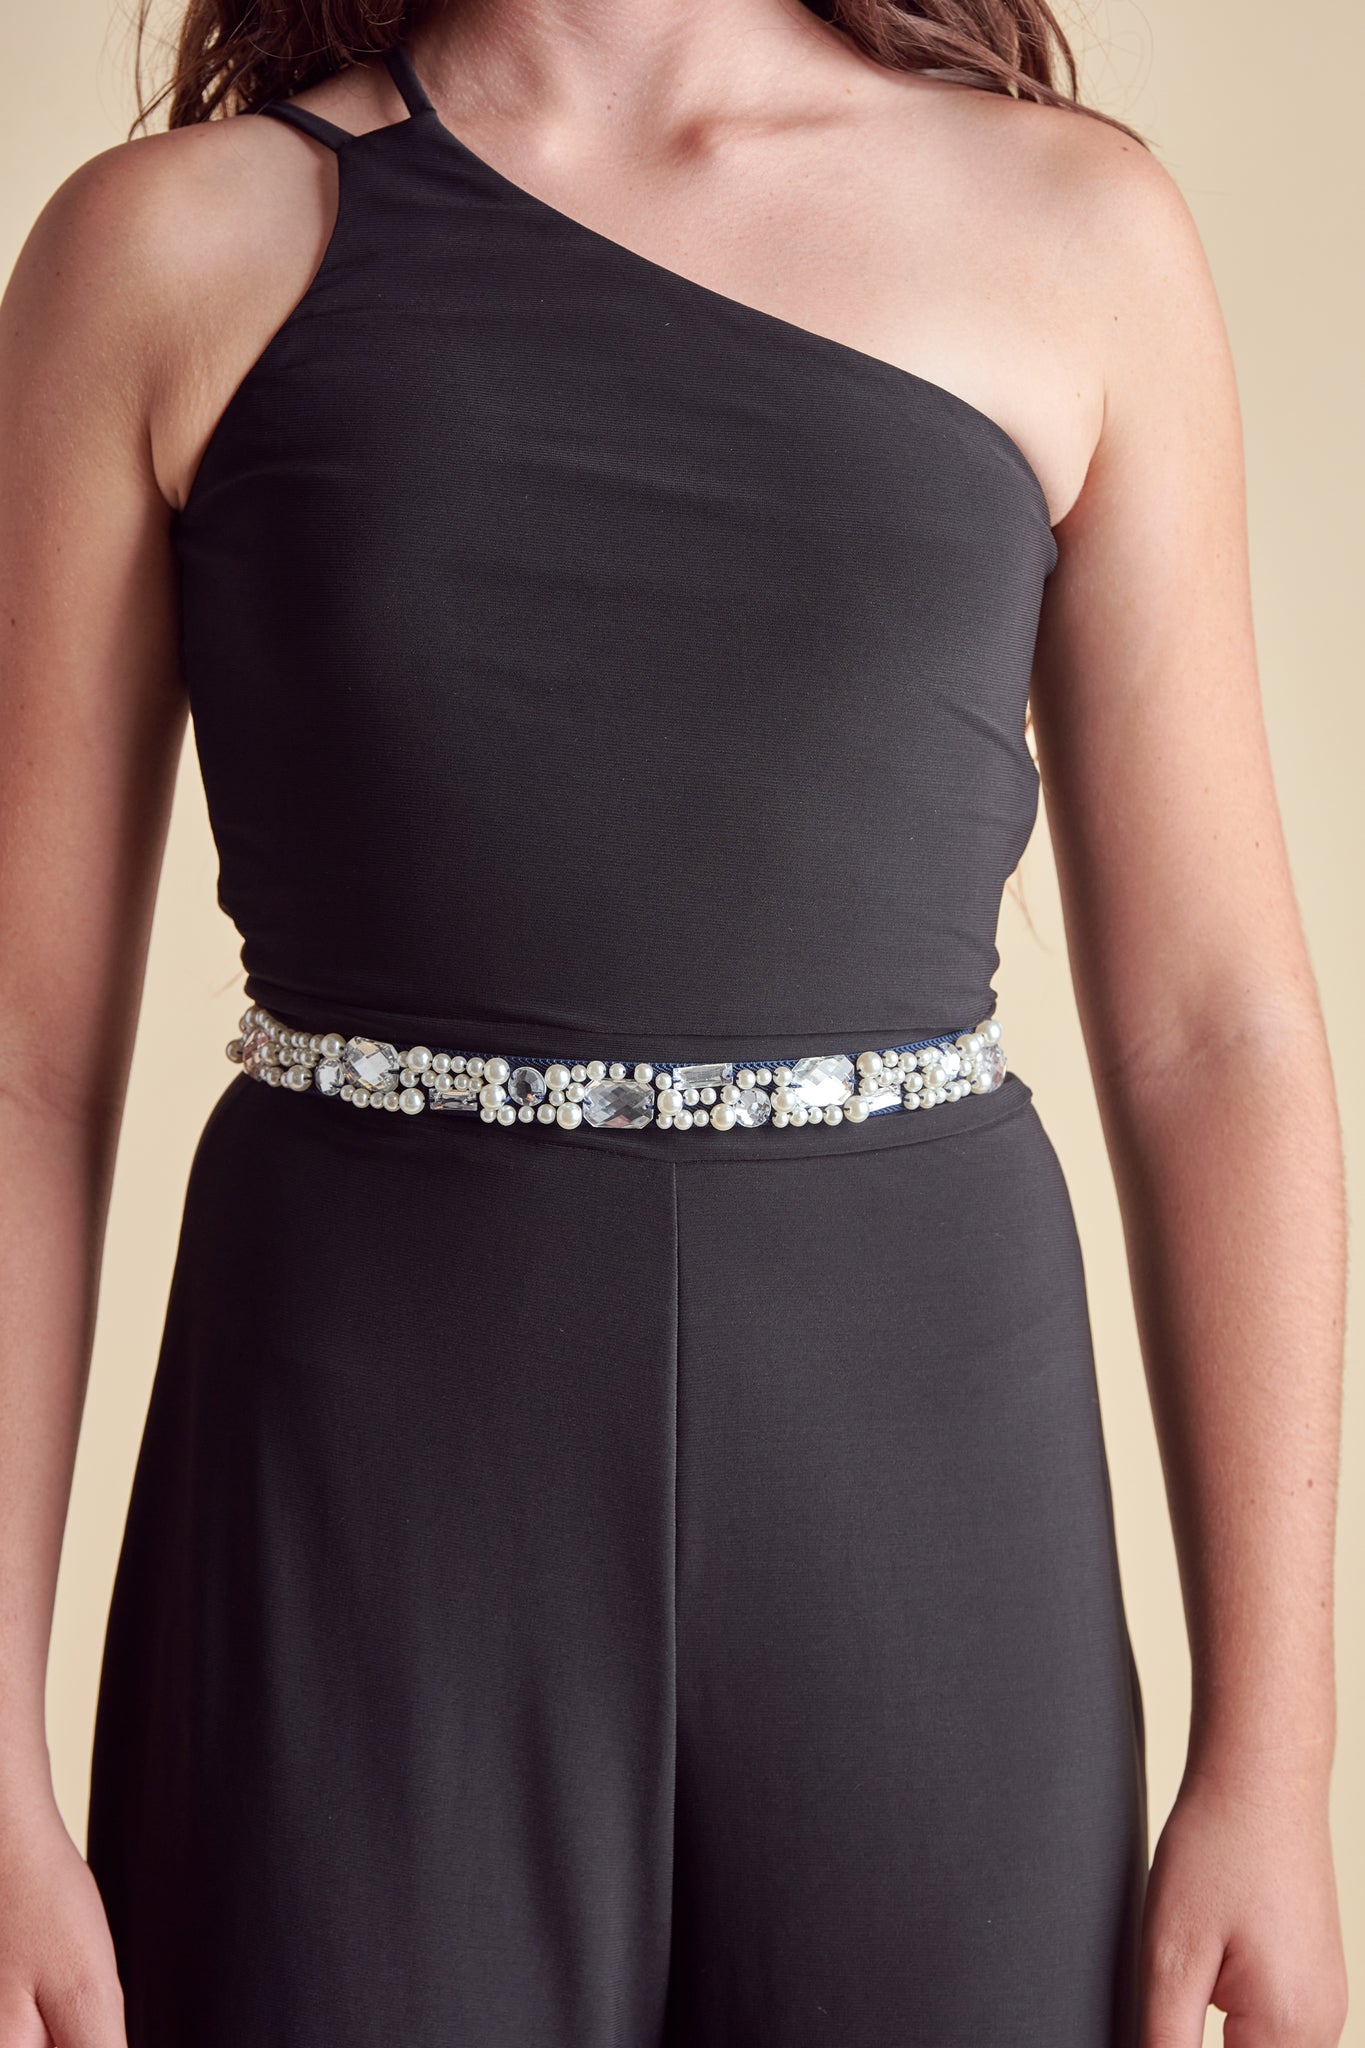 Girl in a navy elasticated belt with pearl and gems.